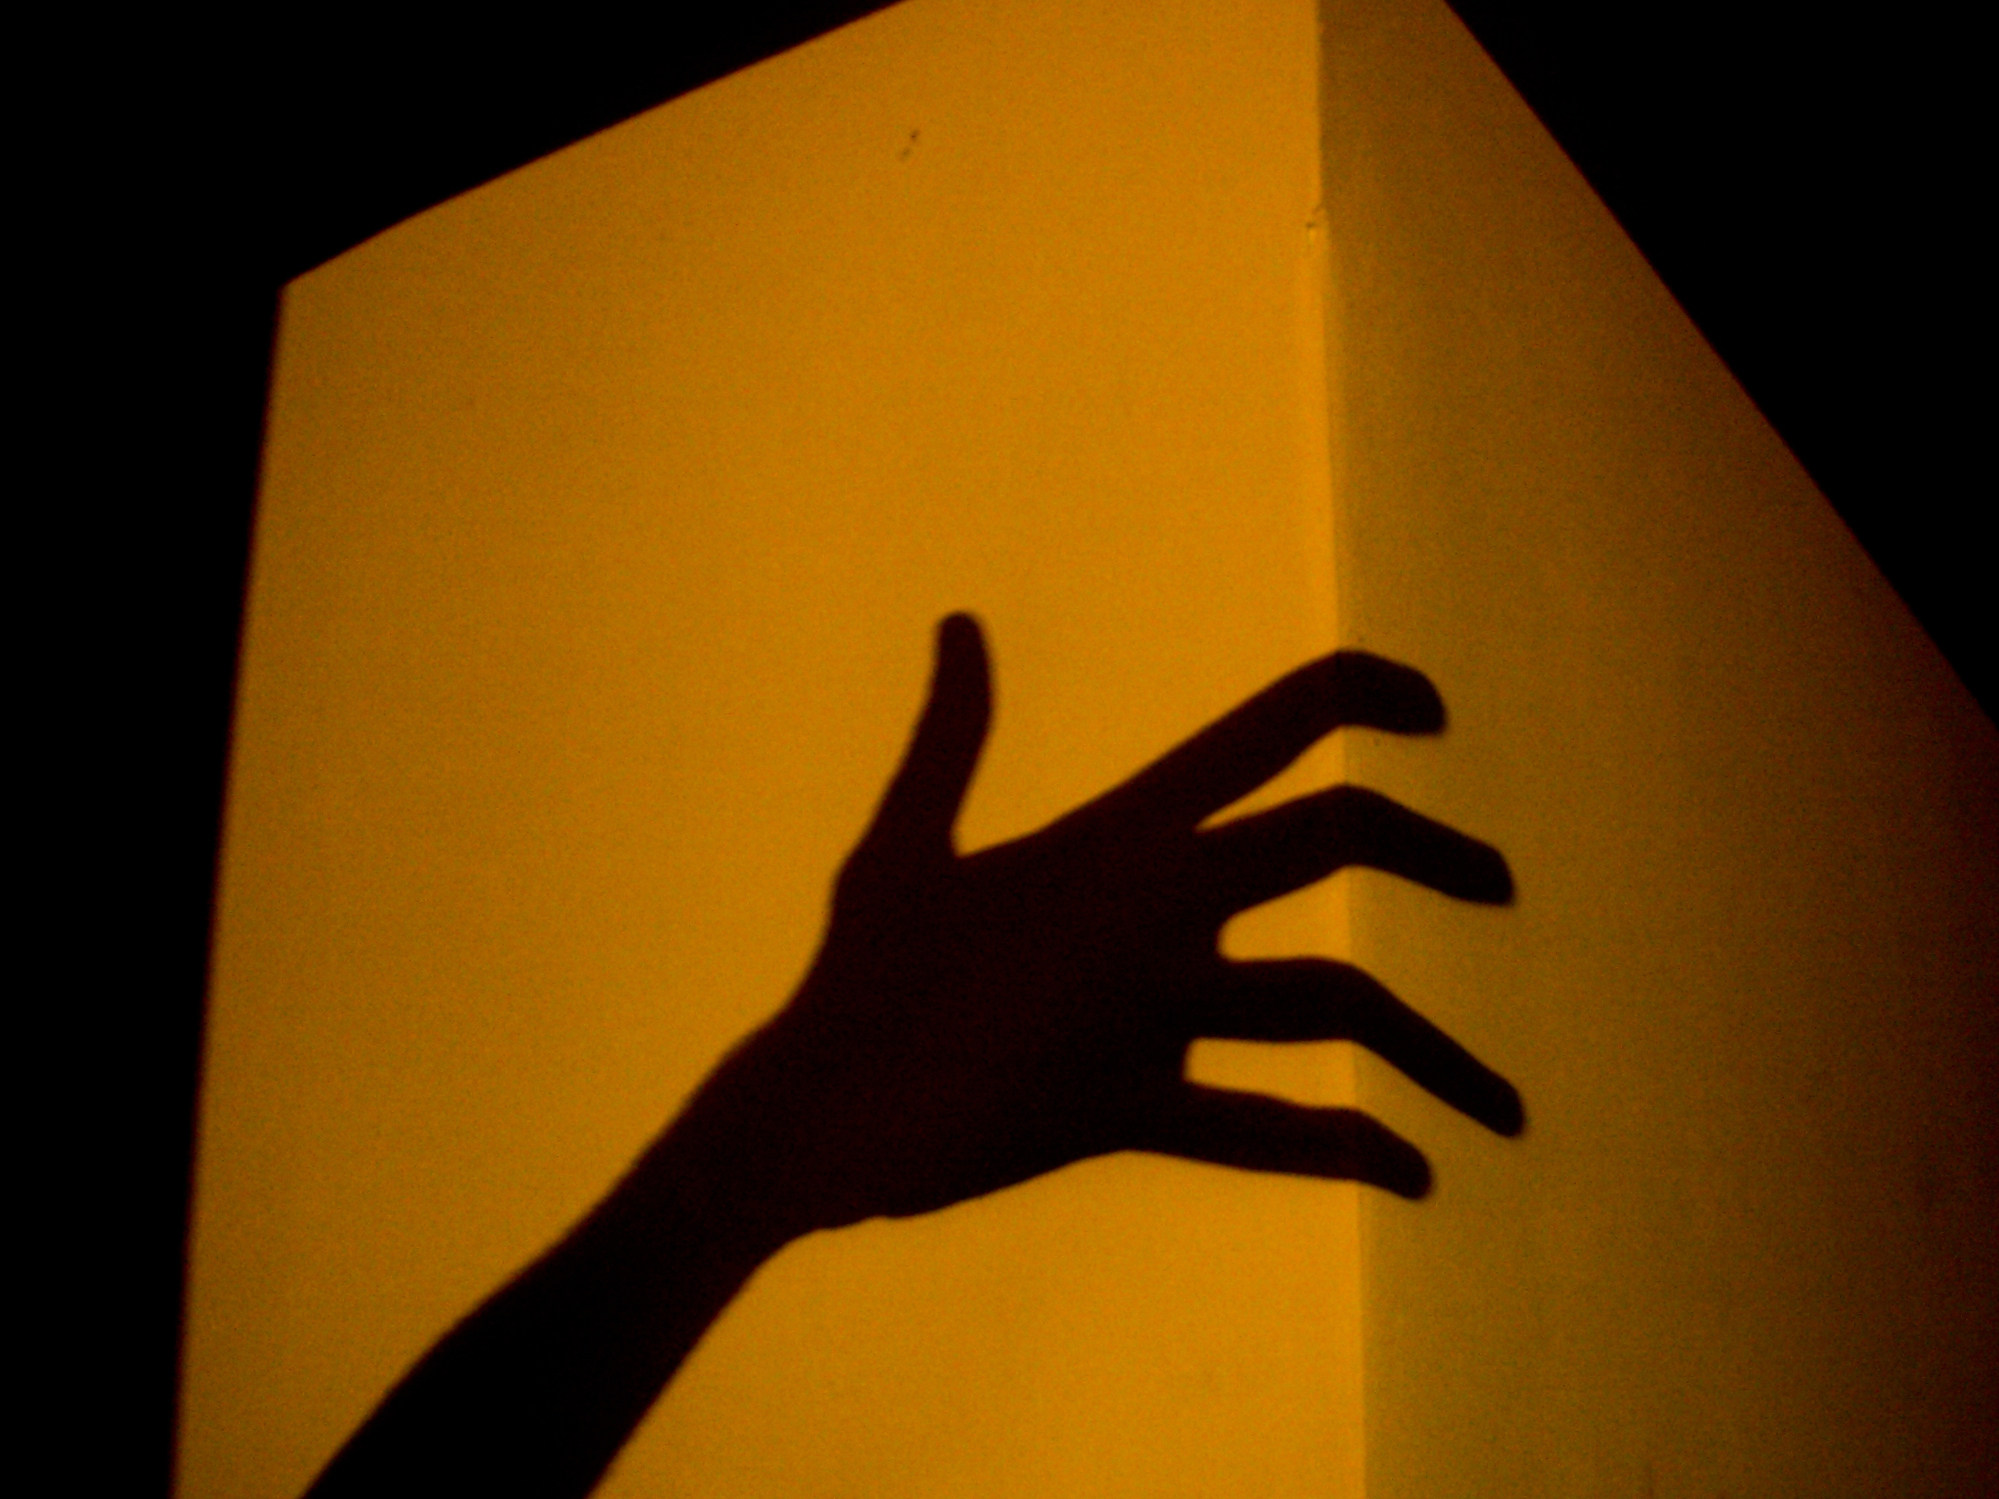 The shadow of a creepy hand